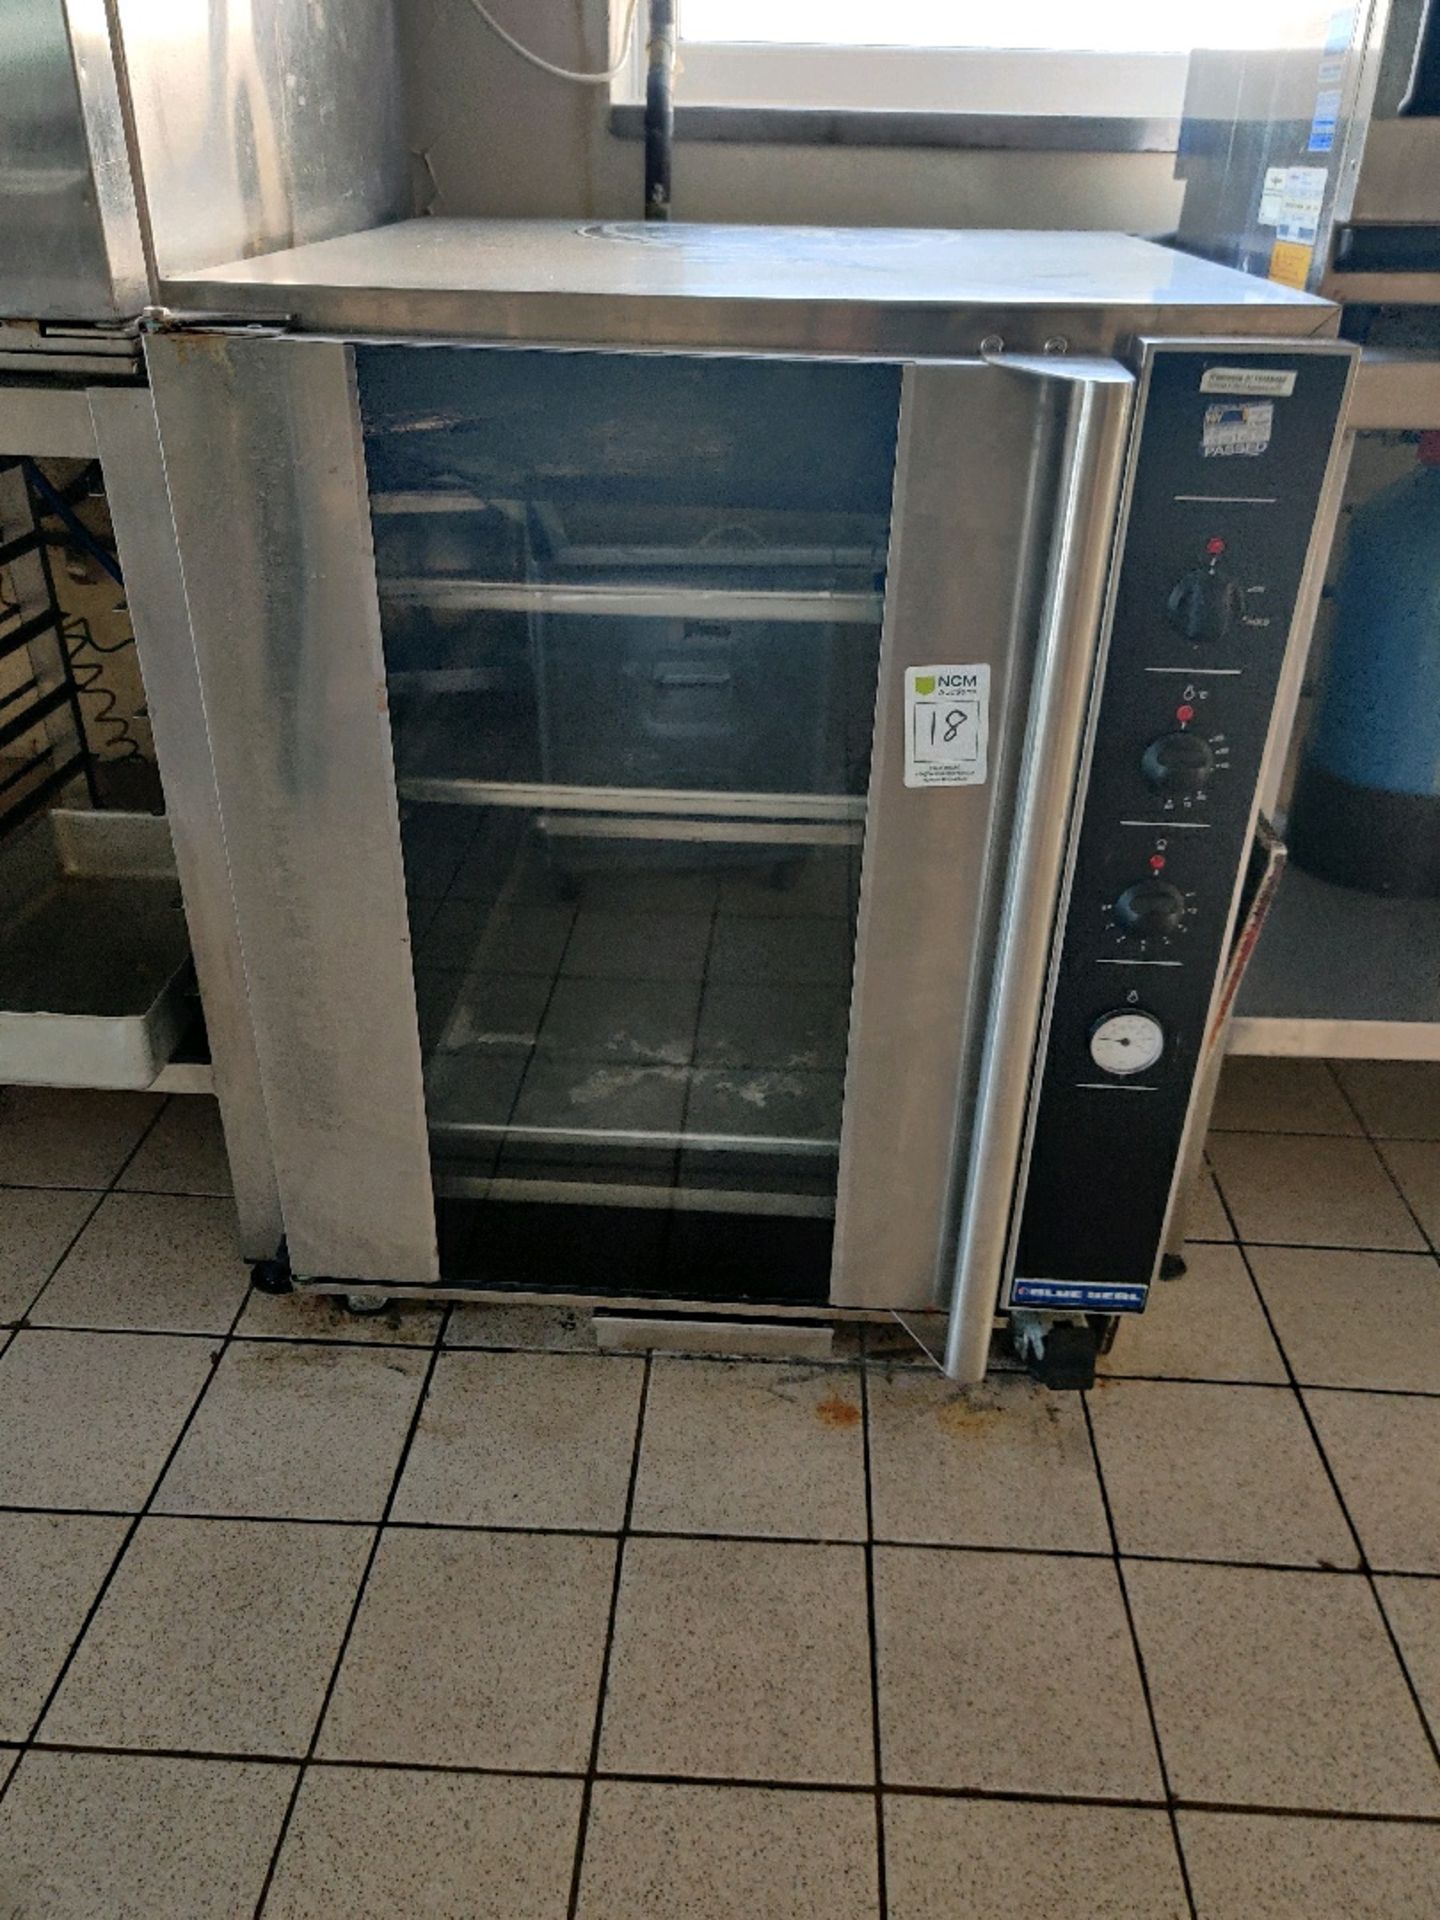 Blue seal oven